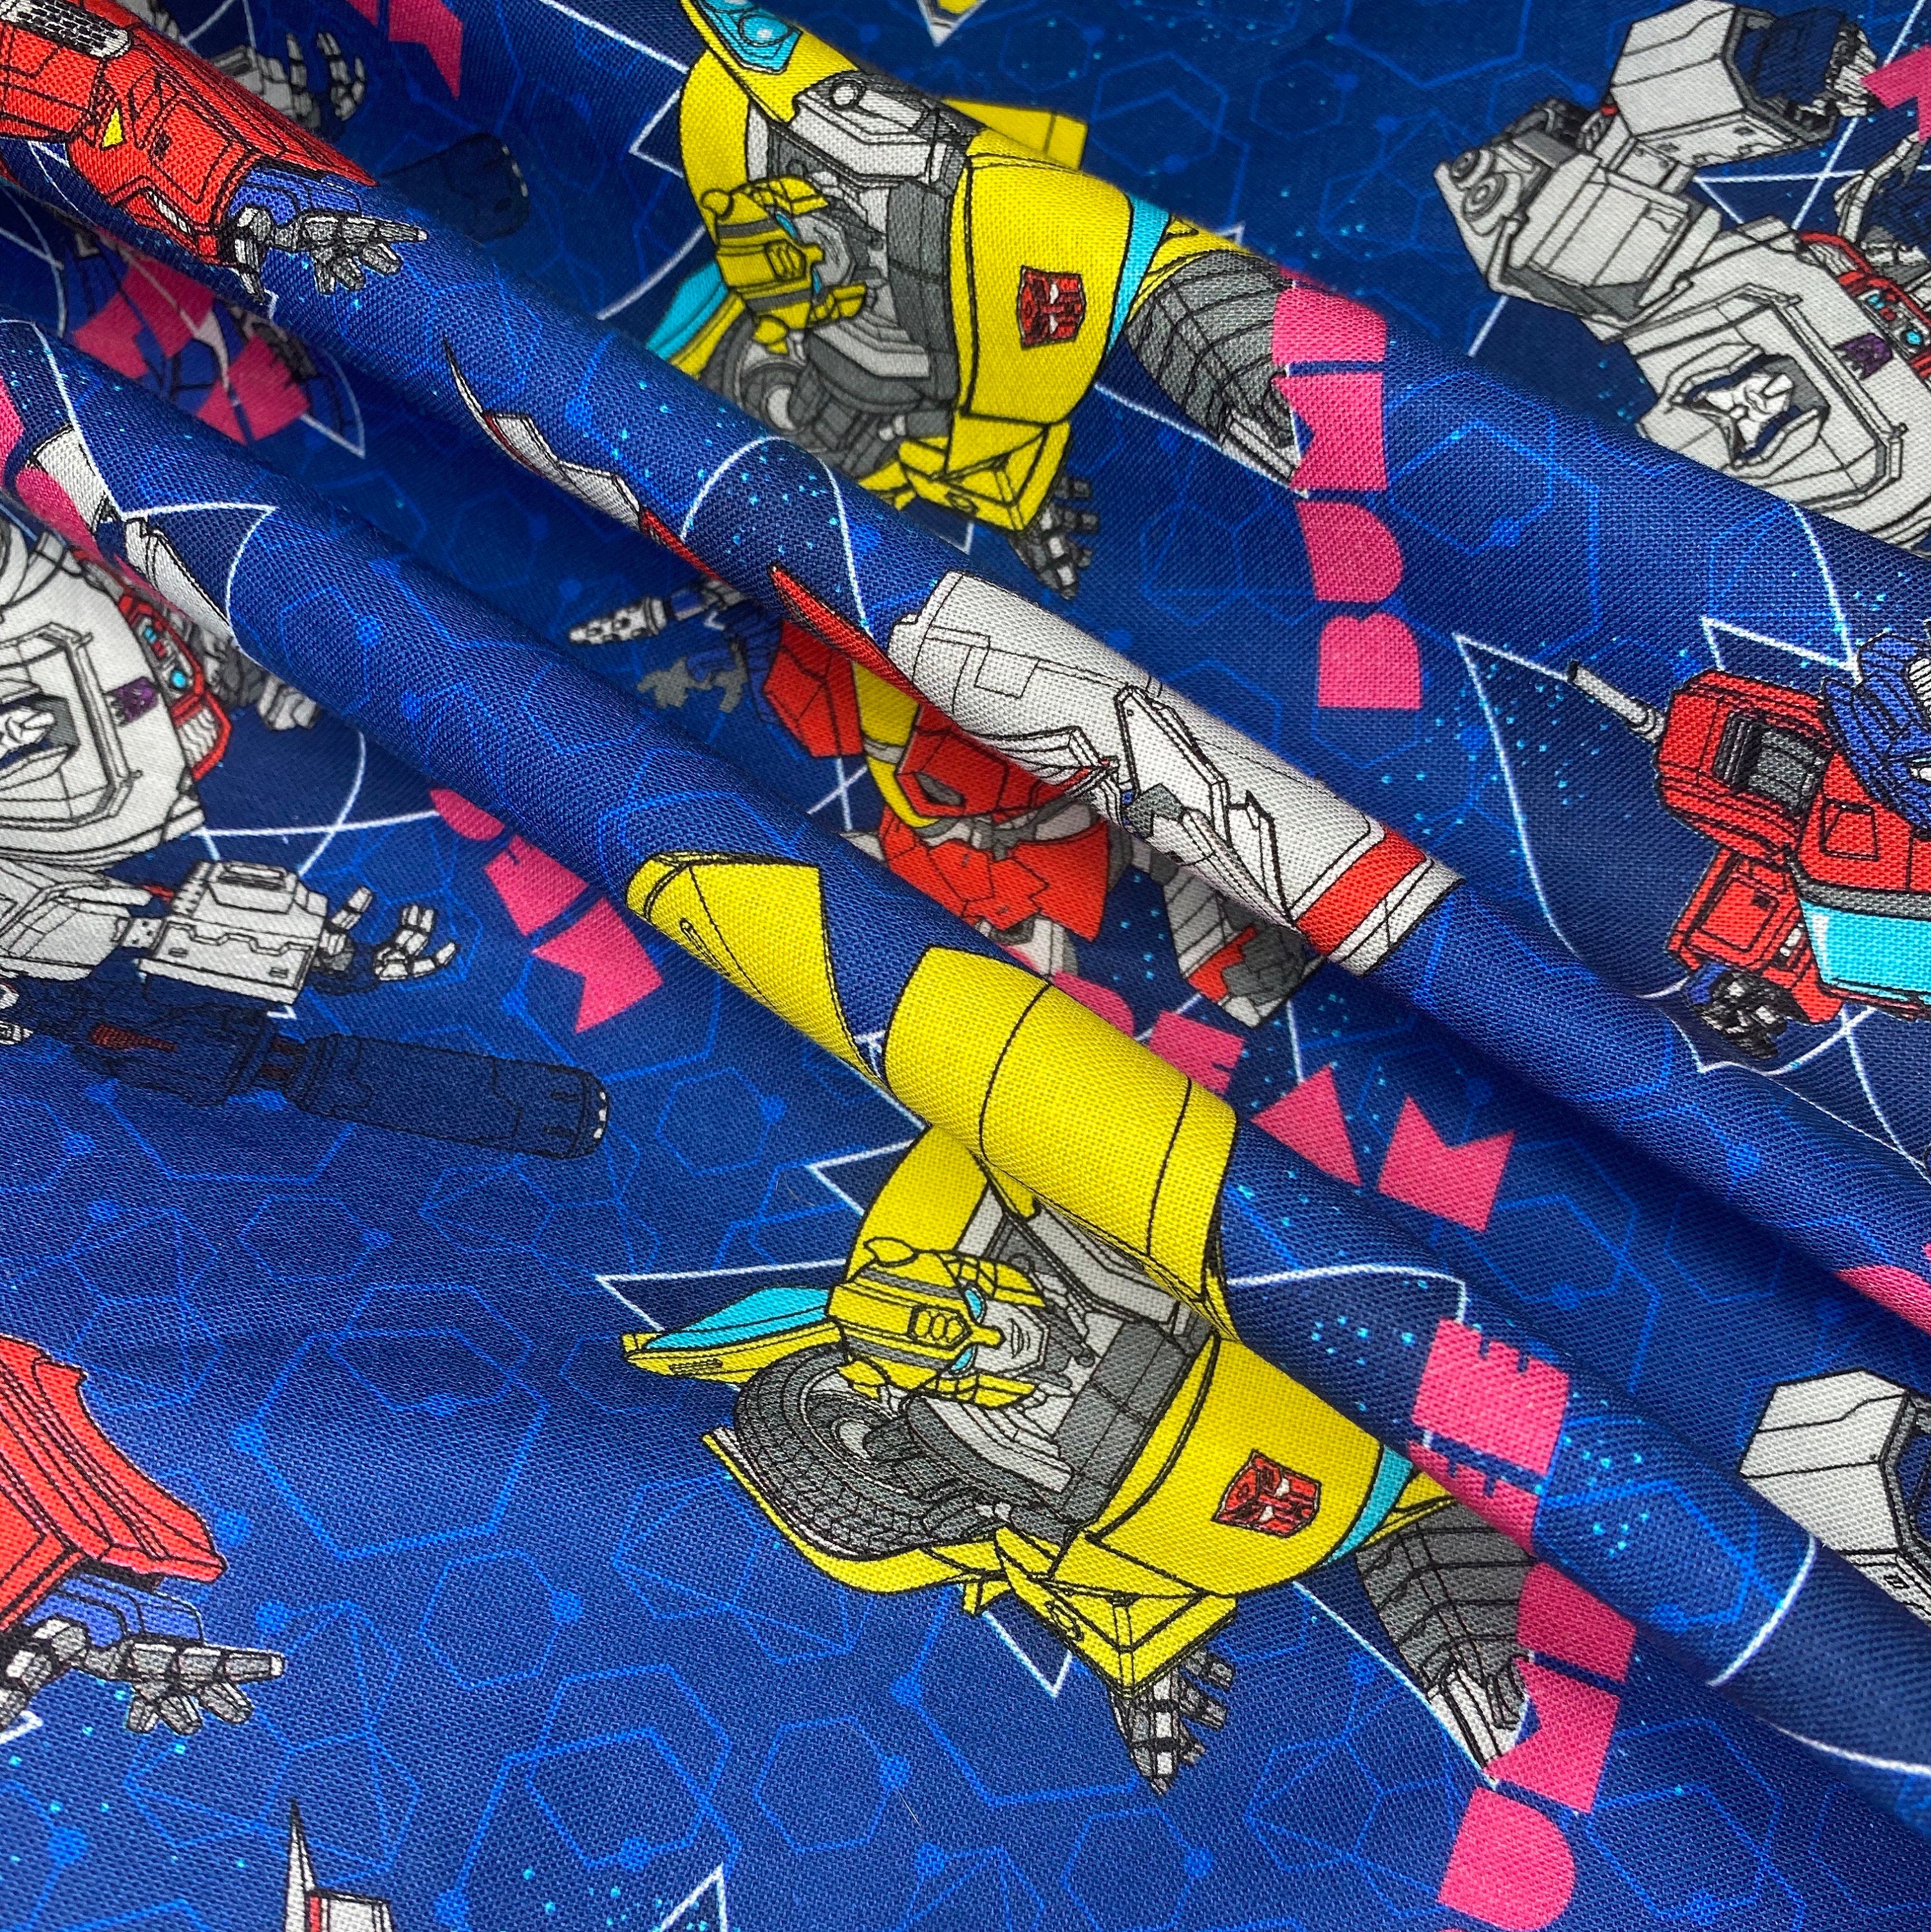 Quilting Cotton - Transformers - Blue - Remnant